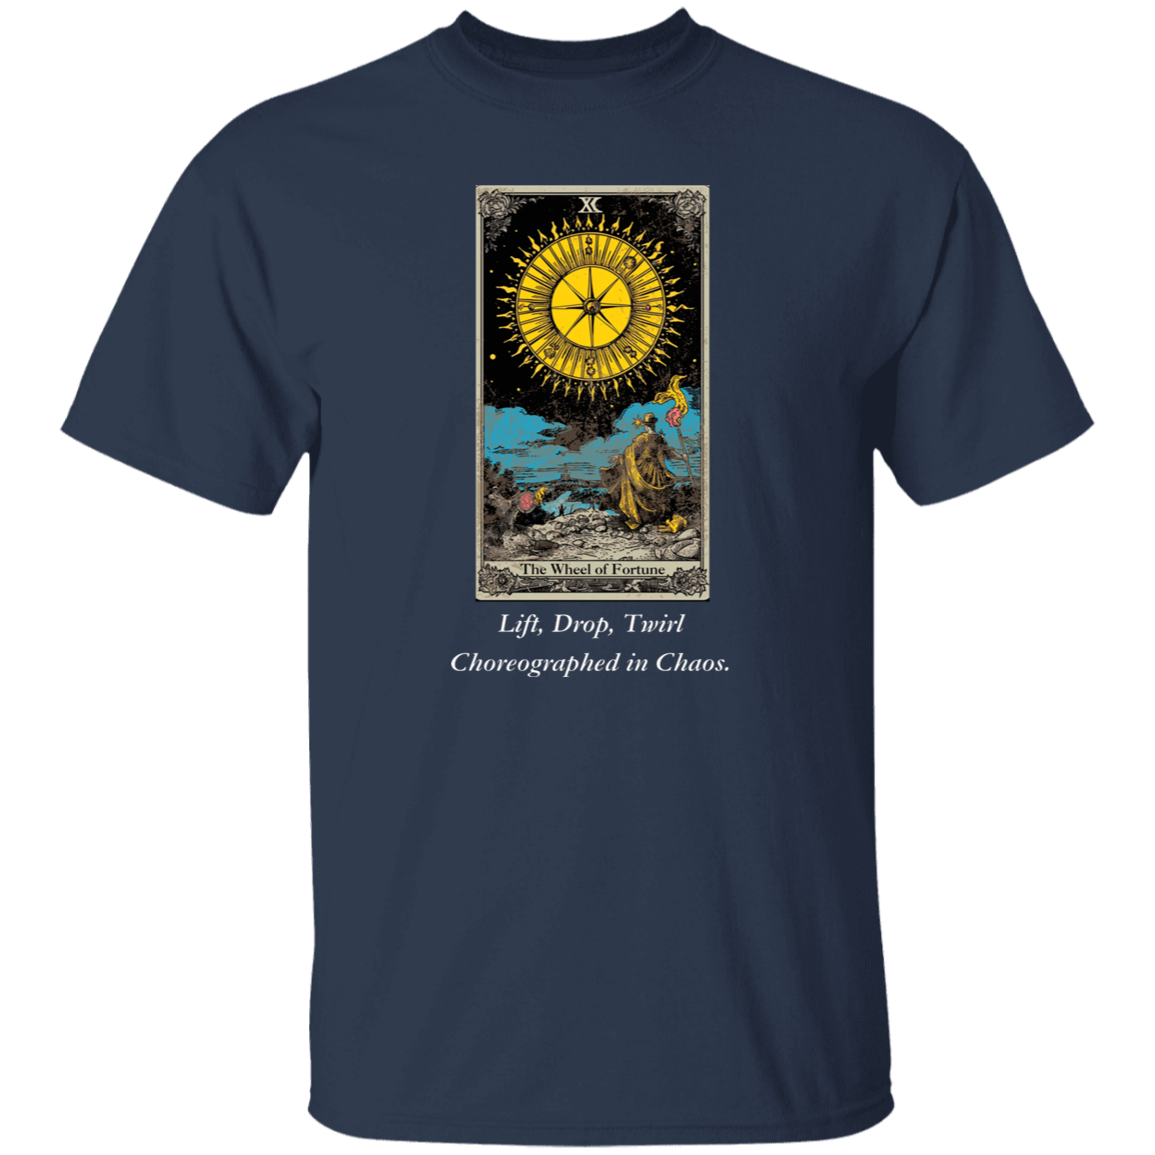 Funny, the wheel of fortune men's navy tarot card T shirt from BLK Moon Shop